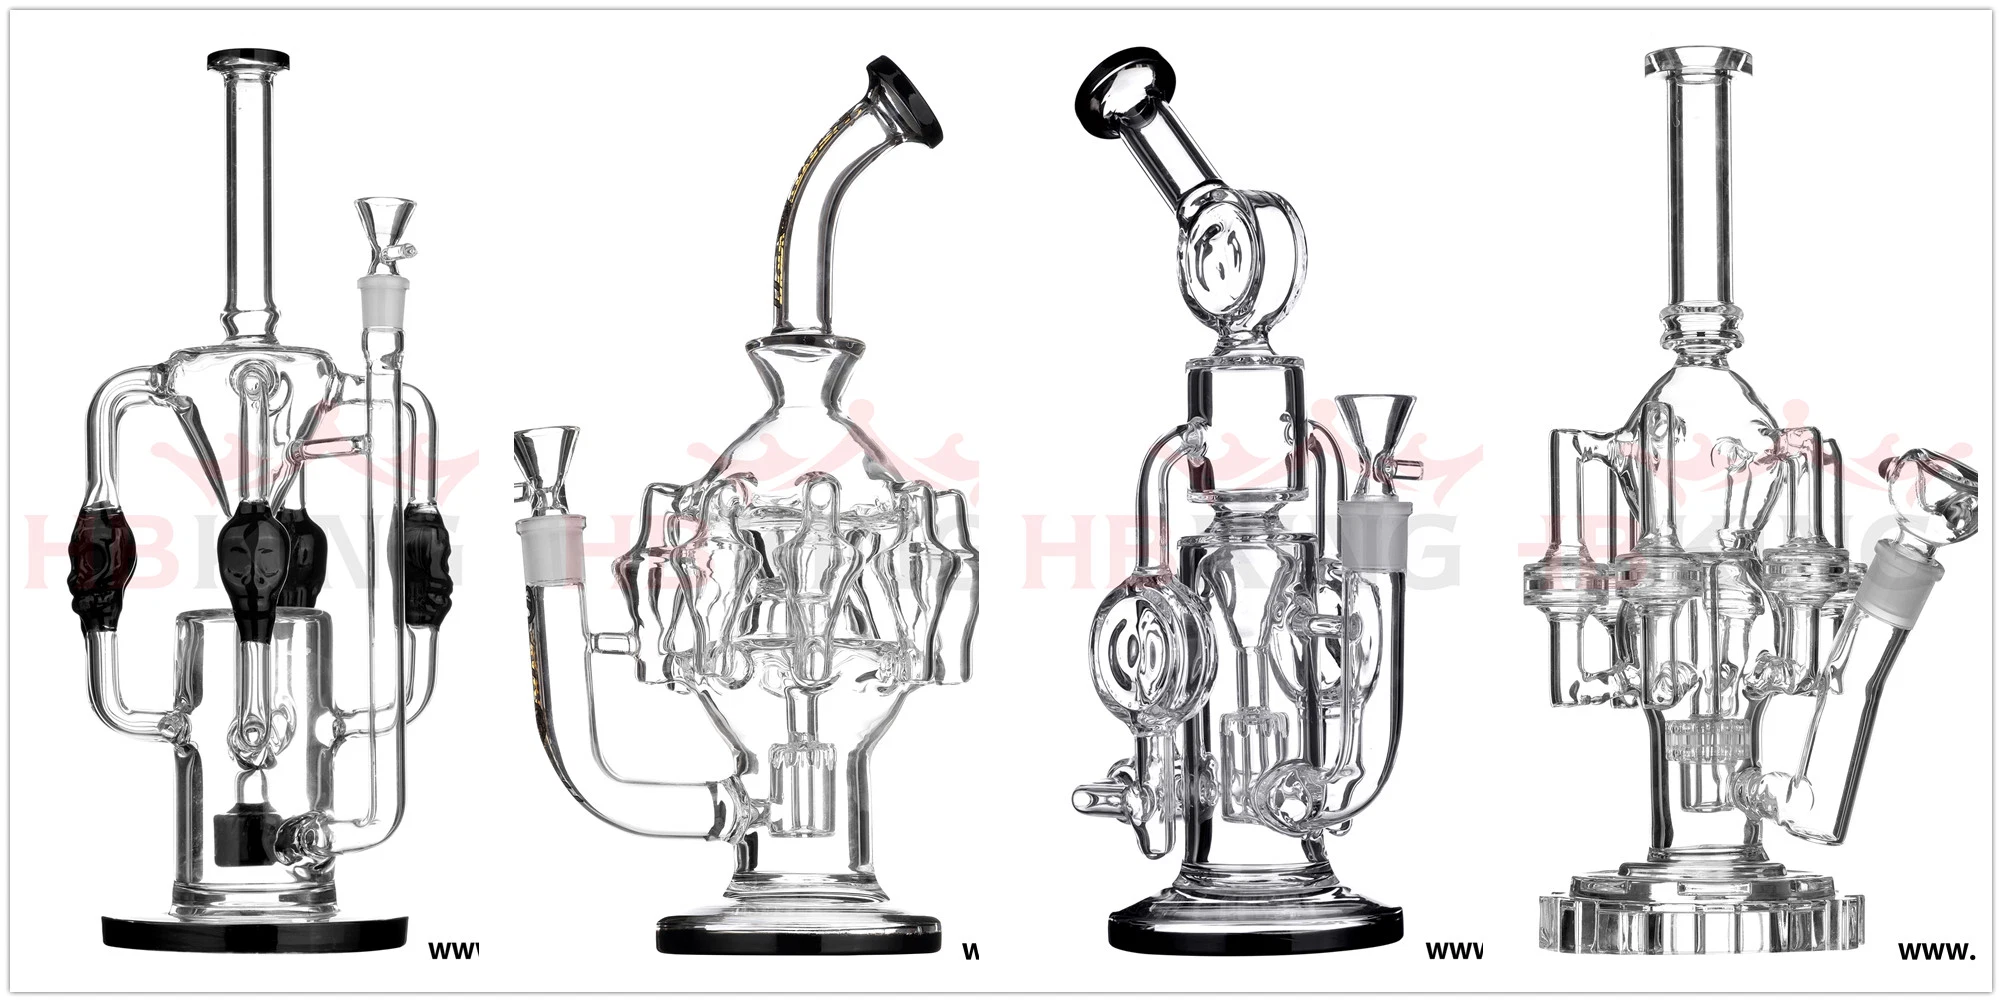 China Manufacturer Double Recycler Tobacco Glass Smoking Water Pipe